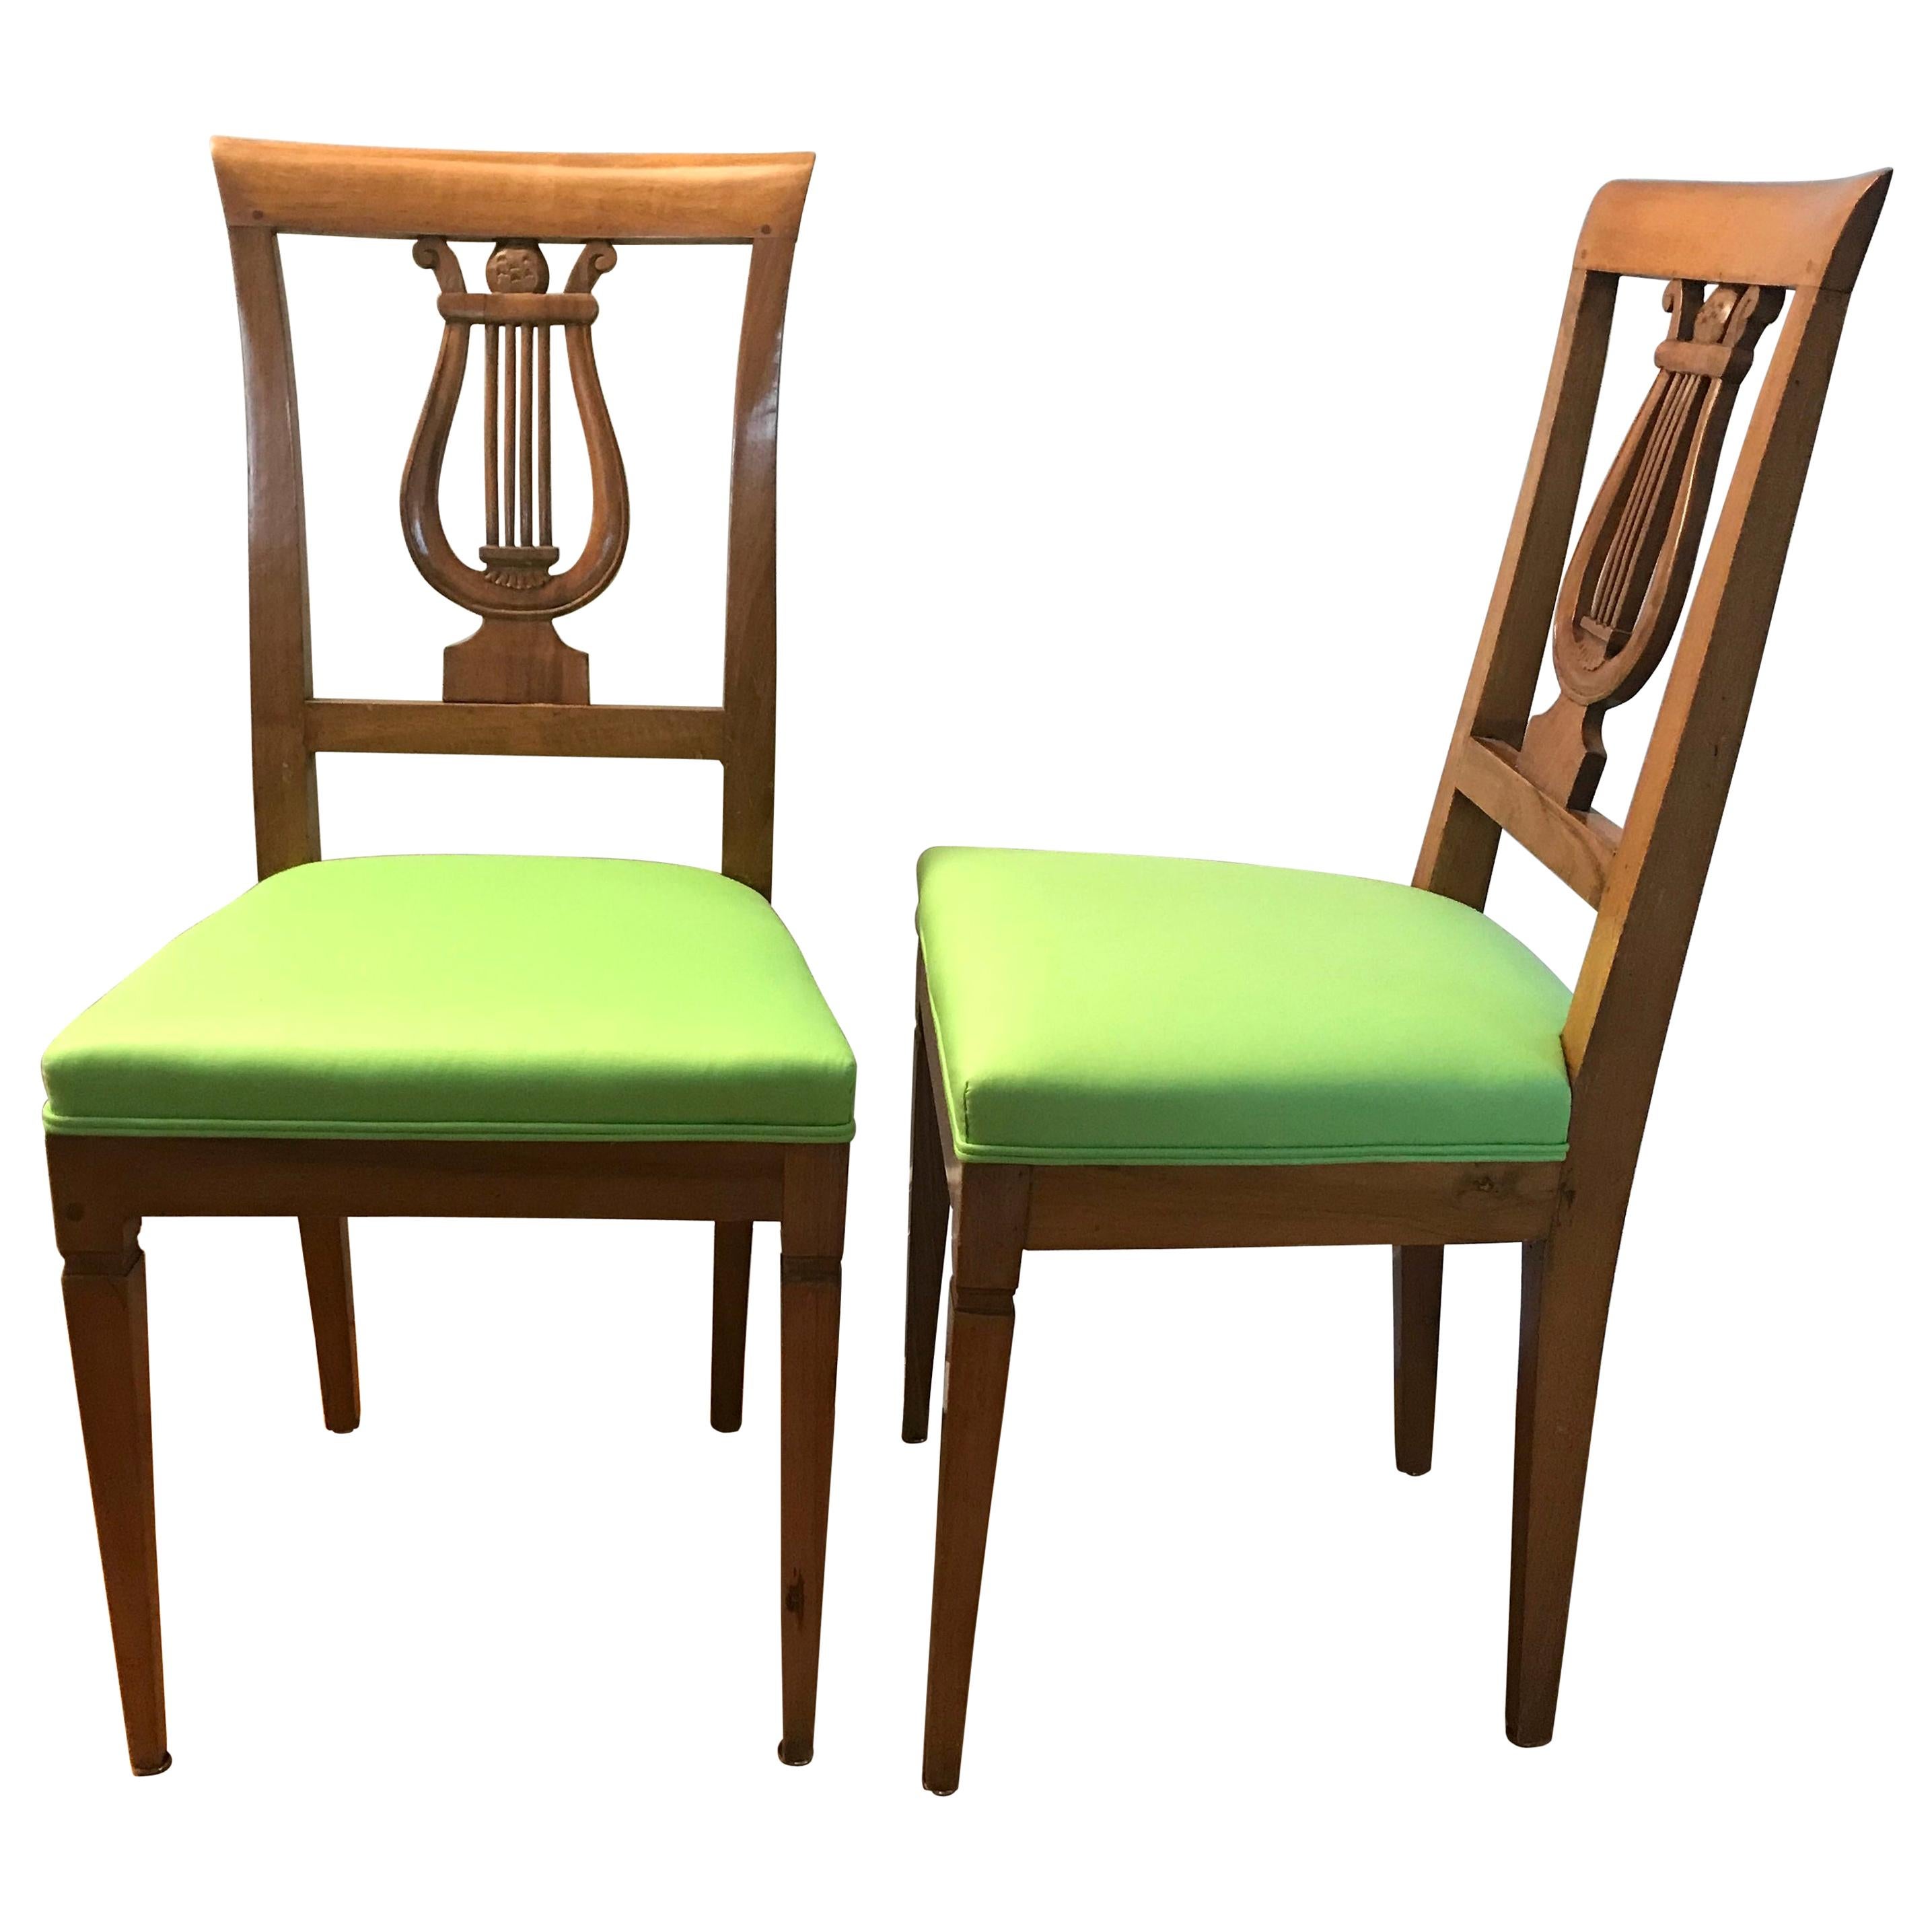 Pair of Directoire Chairs, Western, France, 1810-1820